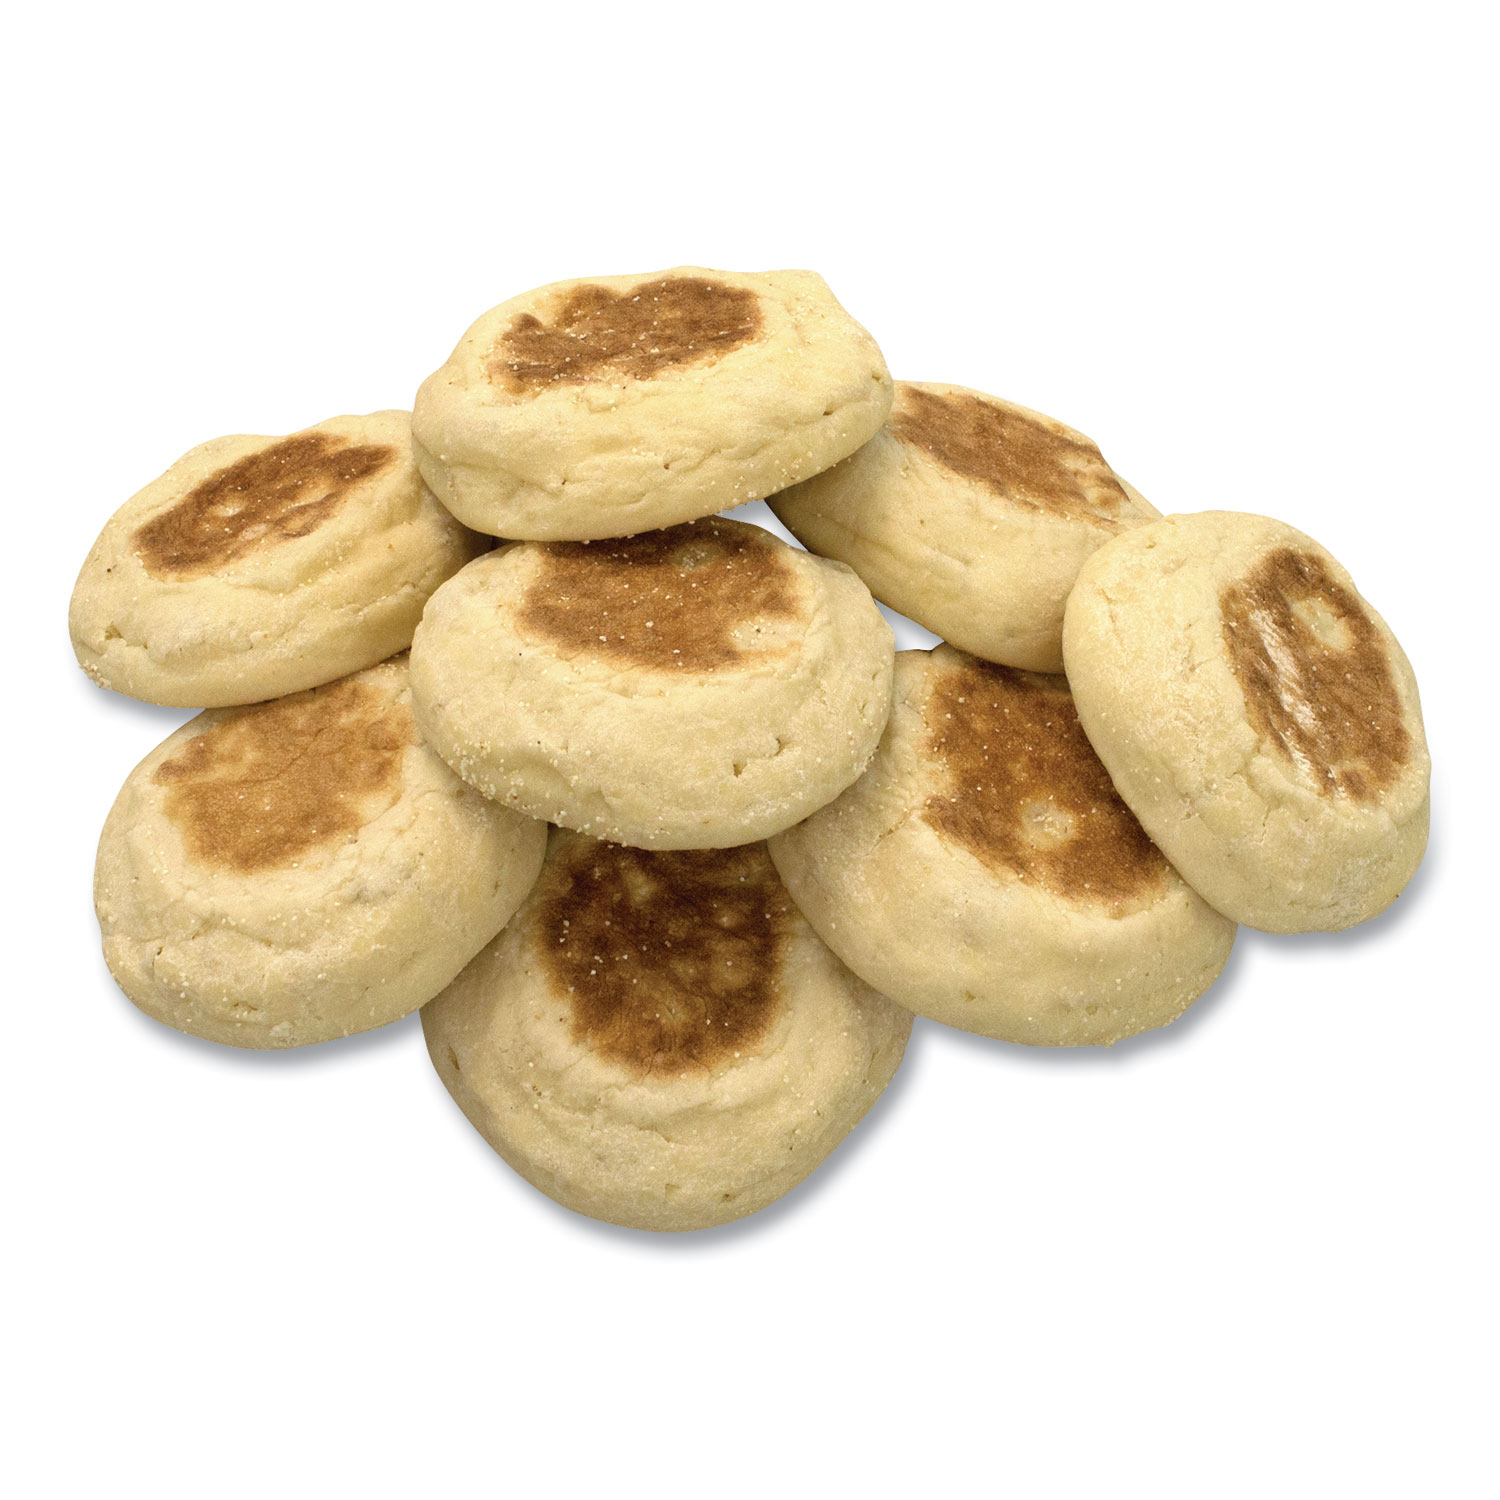  Thomas' 588592 Original English Muffins, 9 Muffins/Pack, 2 Packs/Box, Free Delivery in 1-4 Business Days (GRR90000069) 